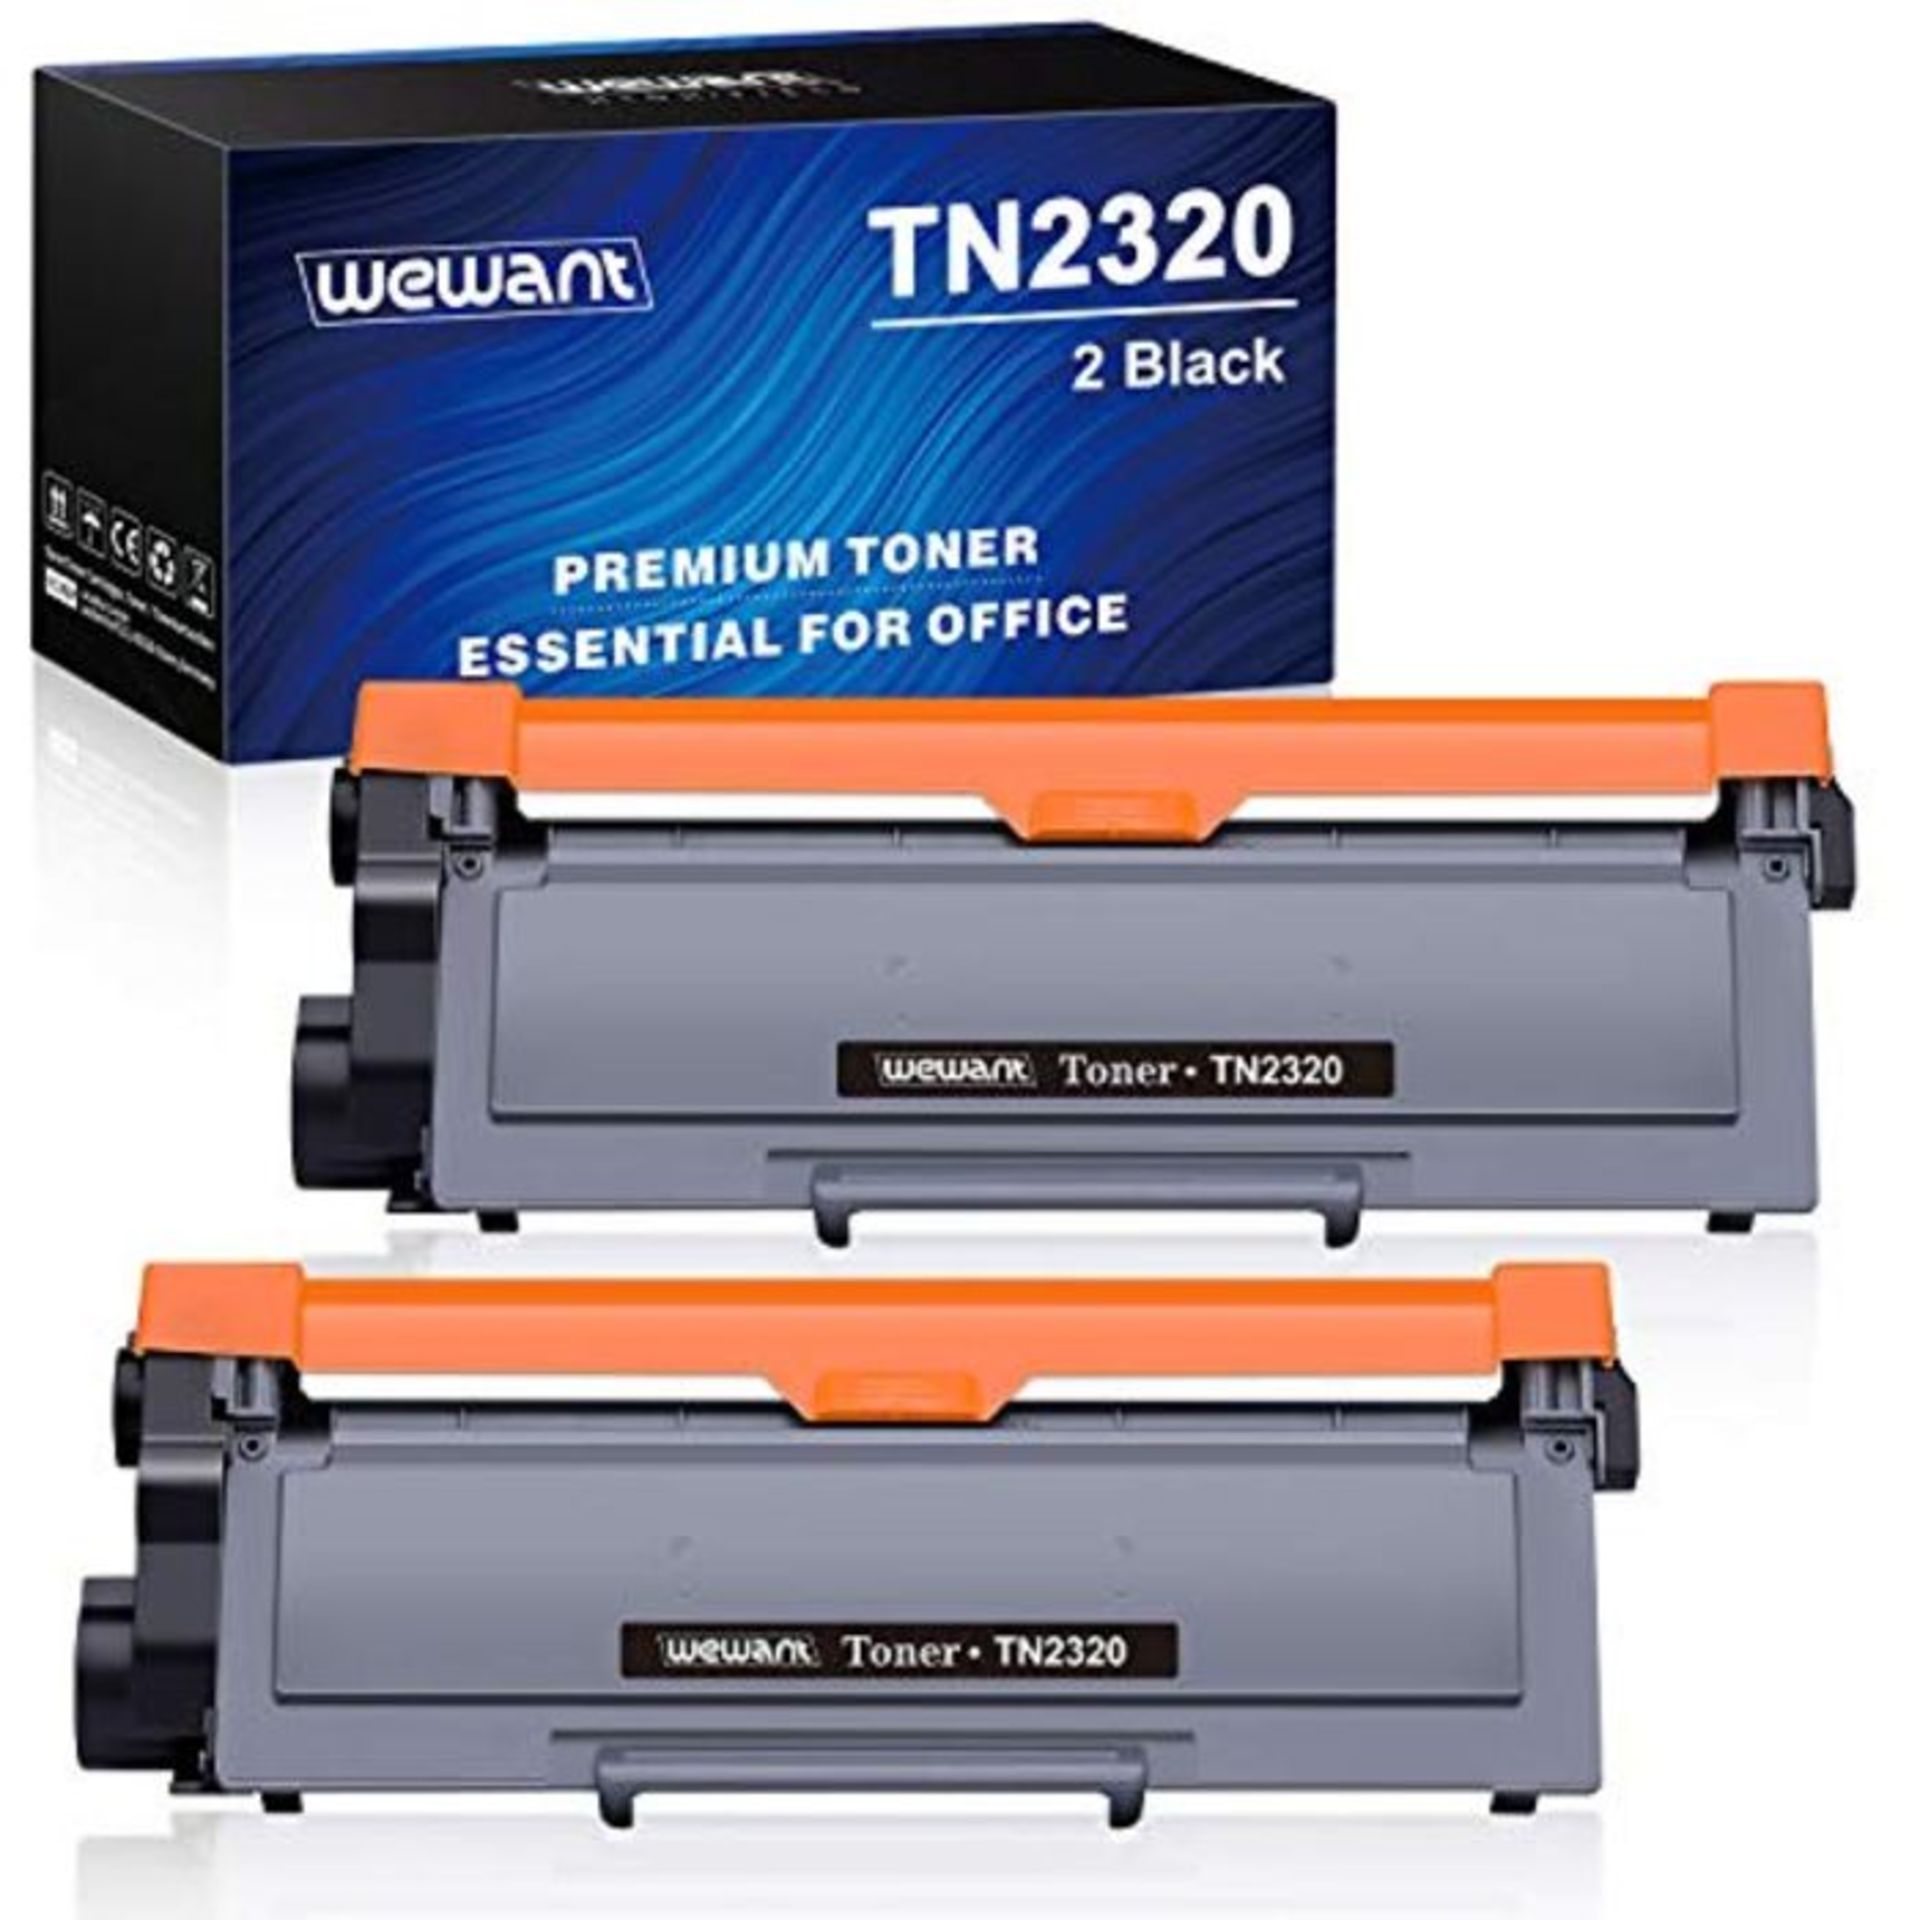 Wewant Toner TN 2320 TN 2310 Replacement for Brother TN2320 TN2310 Toner Cartridges Co